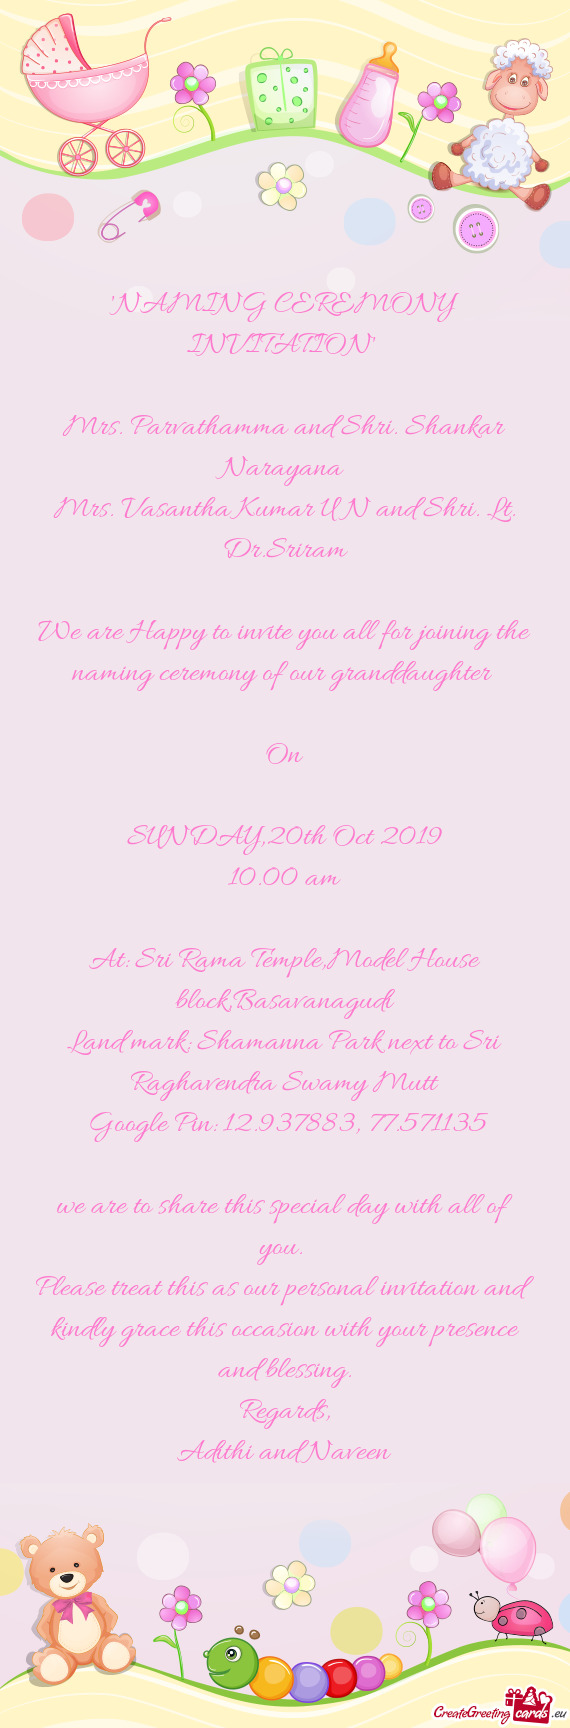 We are Happy to invite you all for joining the naming ceremony of our granddaughter